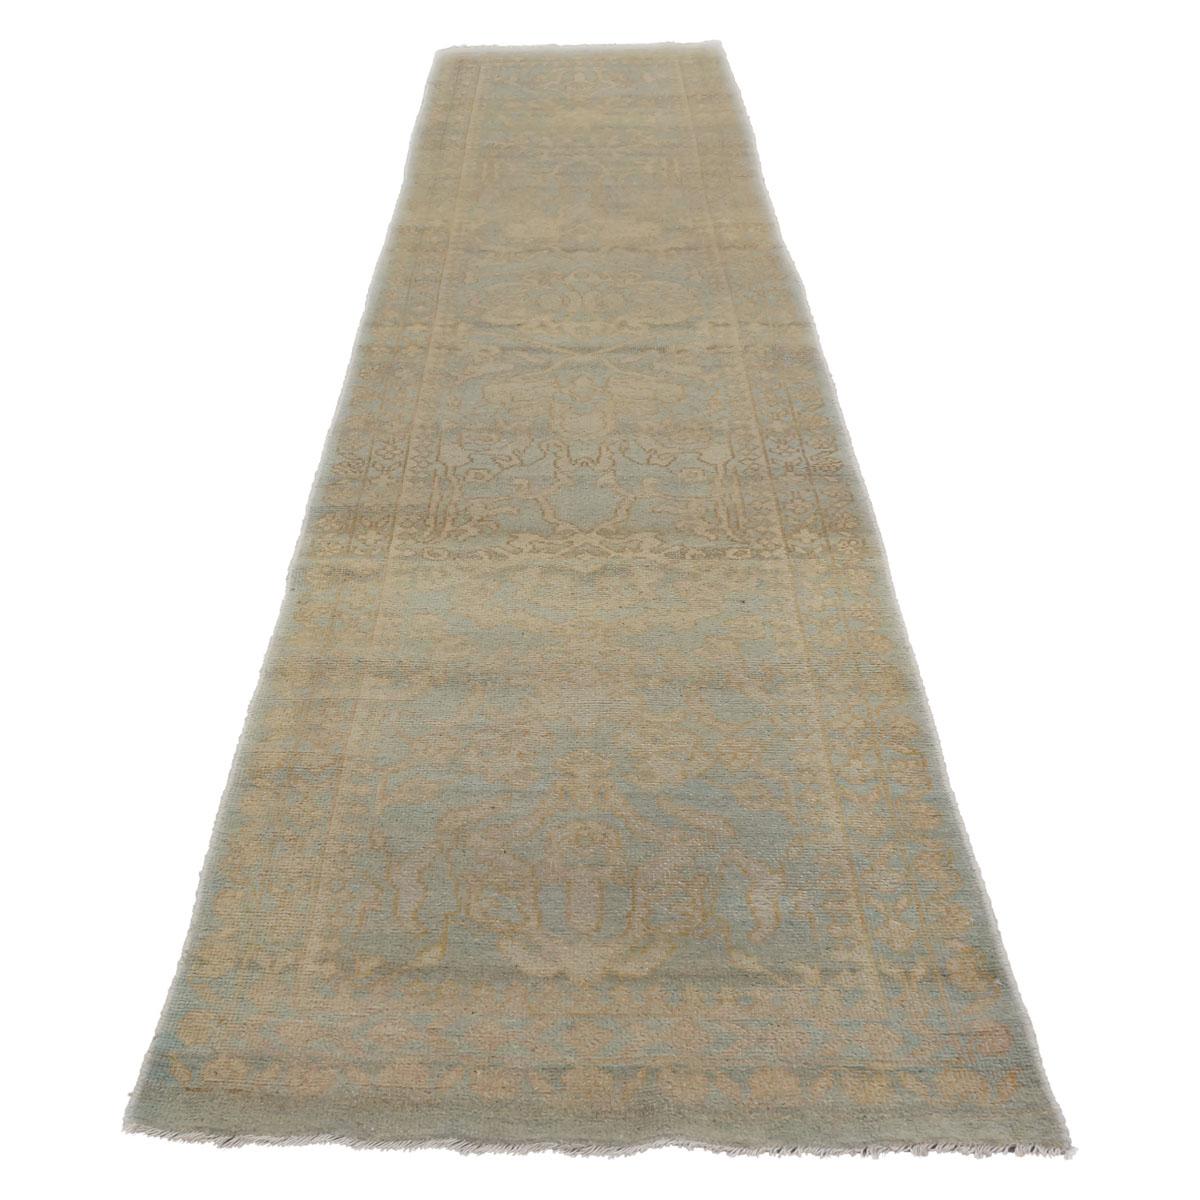 21st Century hand-woven Recreation of an antique Persian Sultanabad Wool Hall Runner. Created by our in-house designers and woven by our expert weavers in Afghanistan with hand-spun vegetable-dyed wools.
Collection: Ashly Sultanabad Masters
Actual